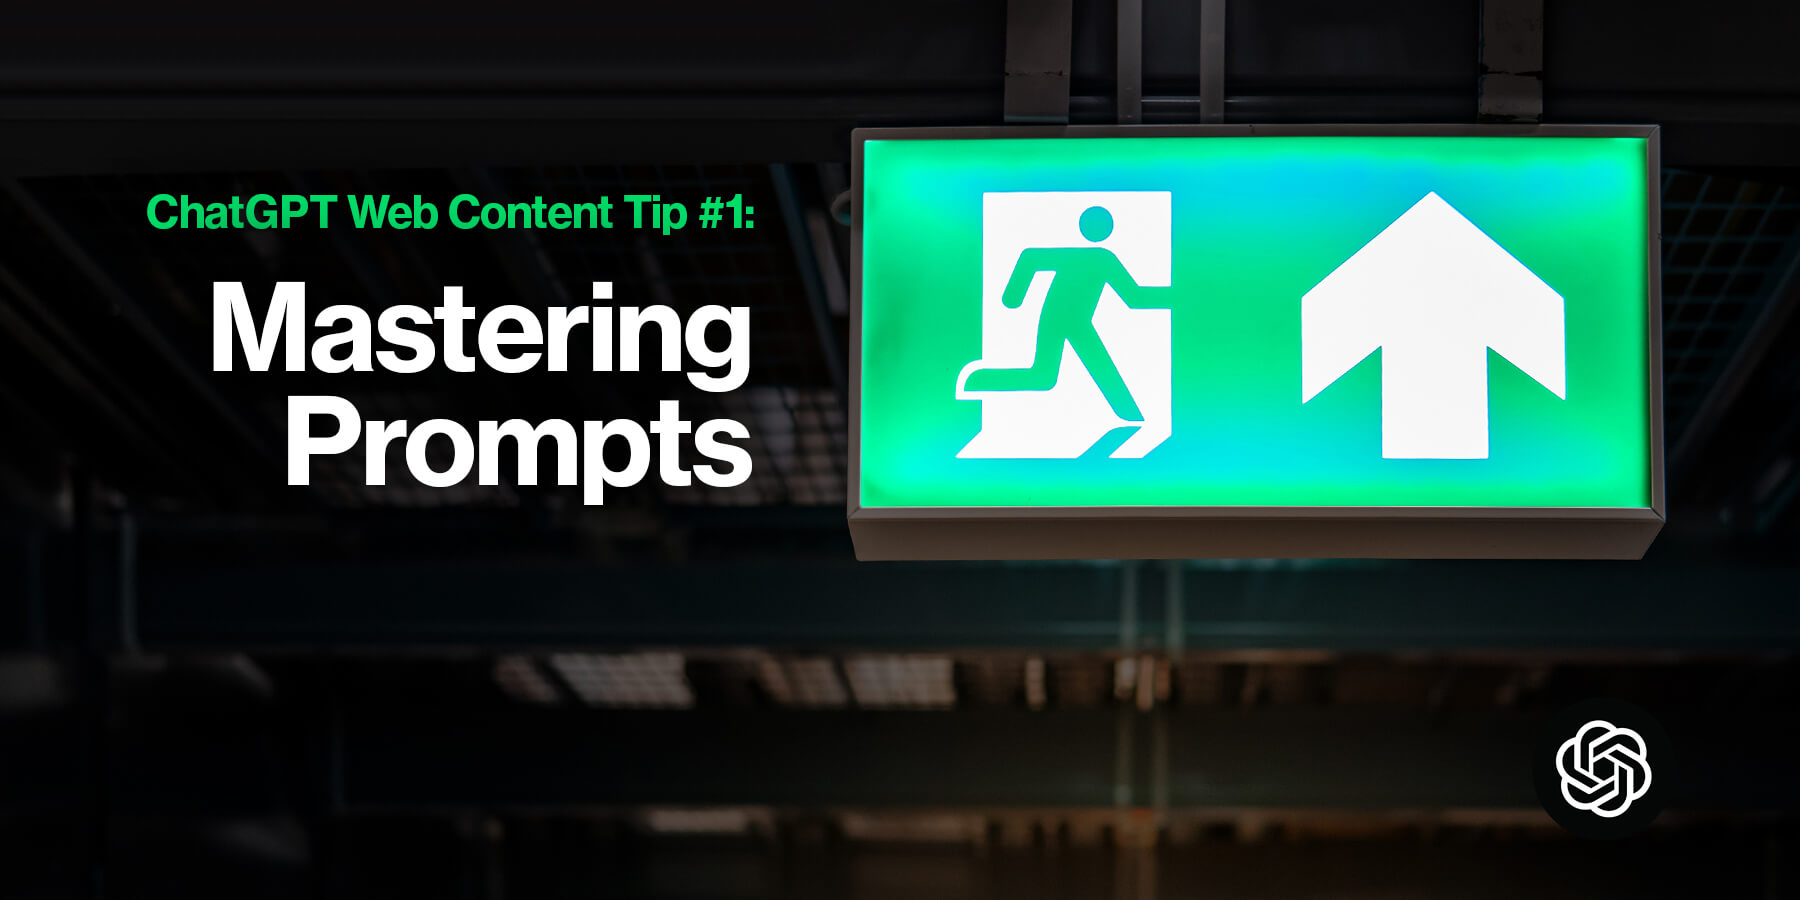 ChatGPT Web Content Tip #1: Mastering Prompts